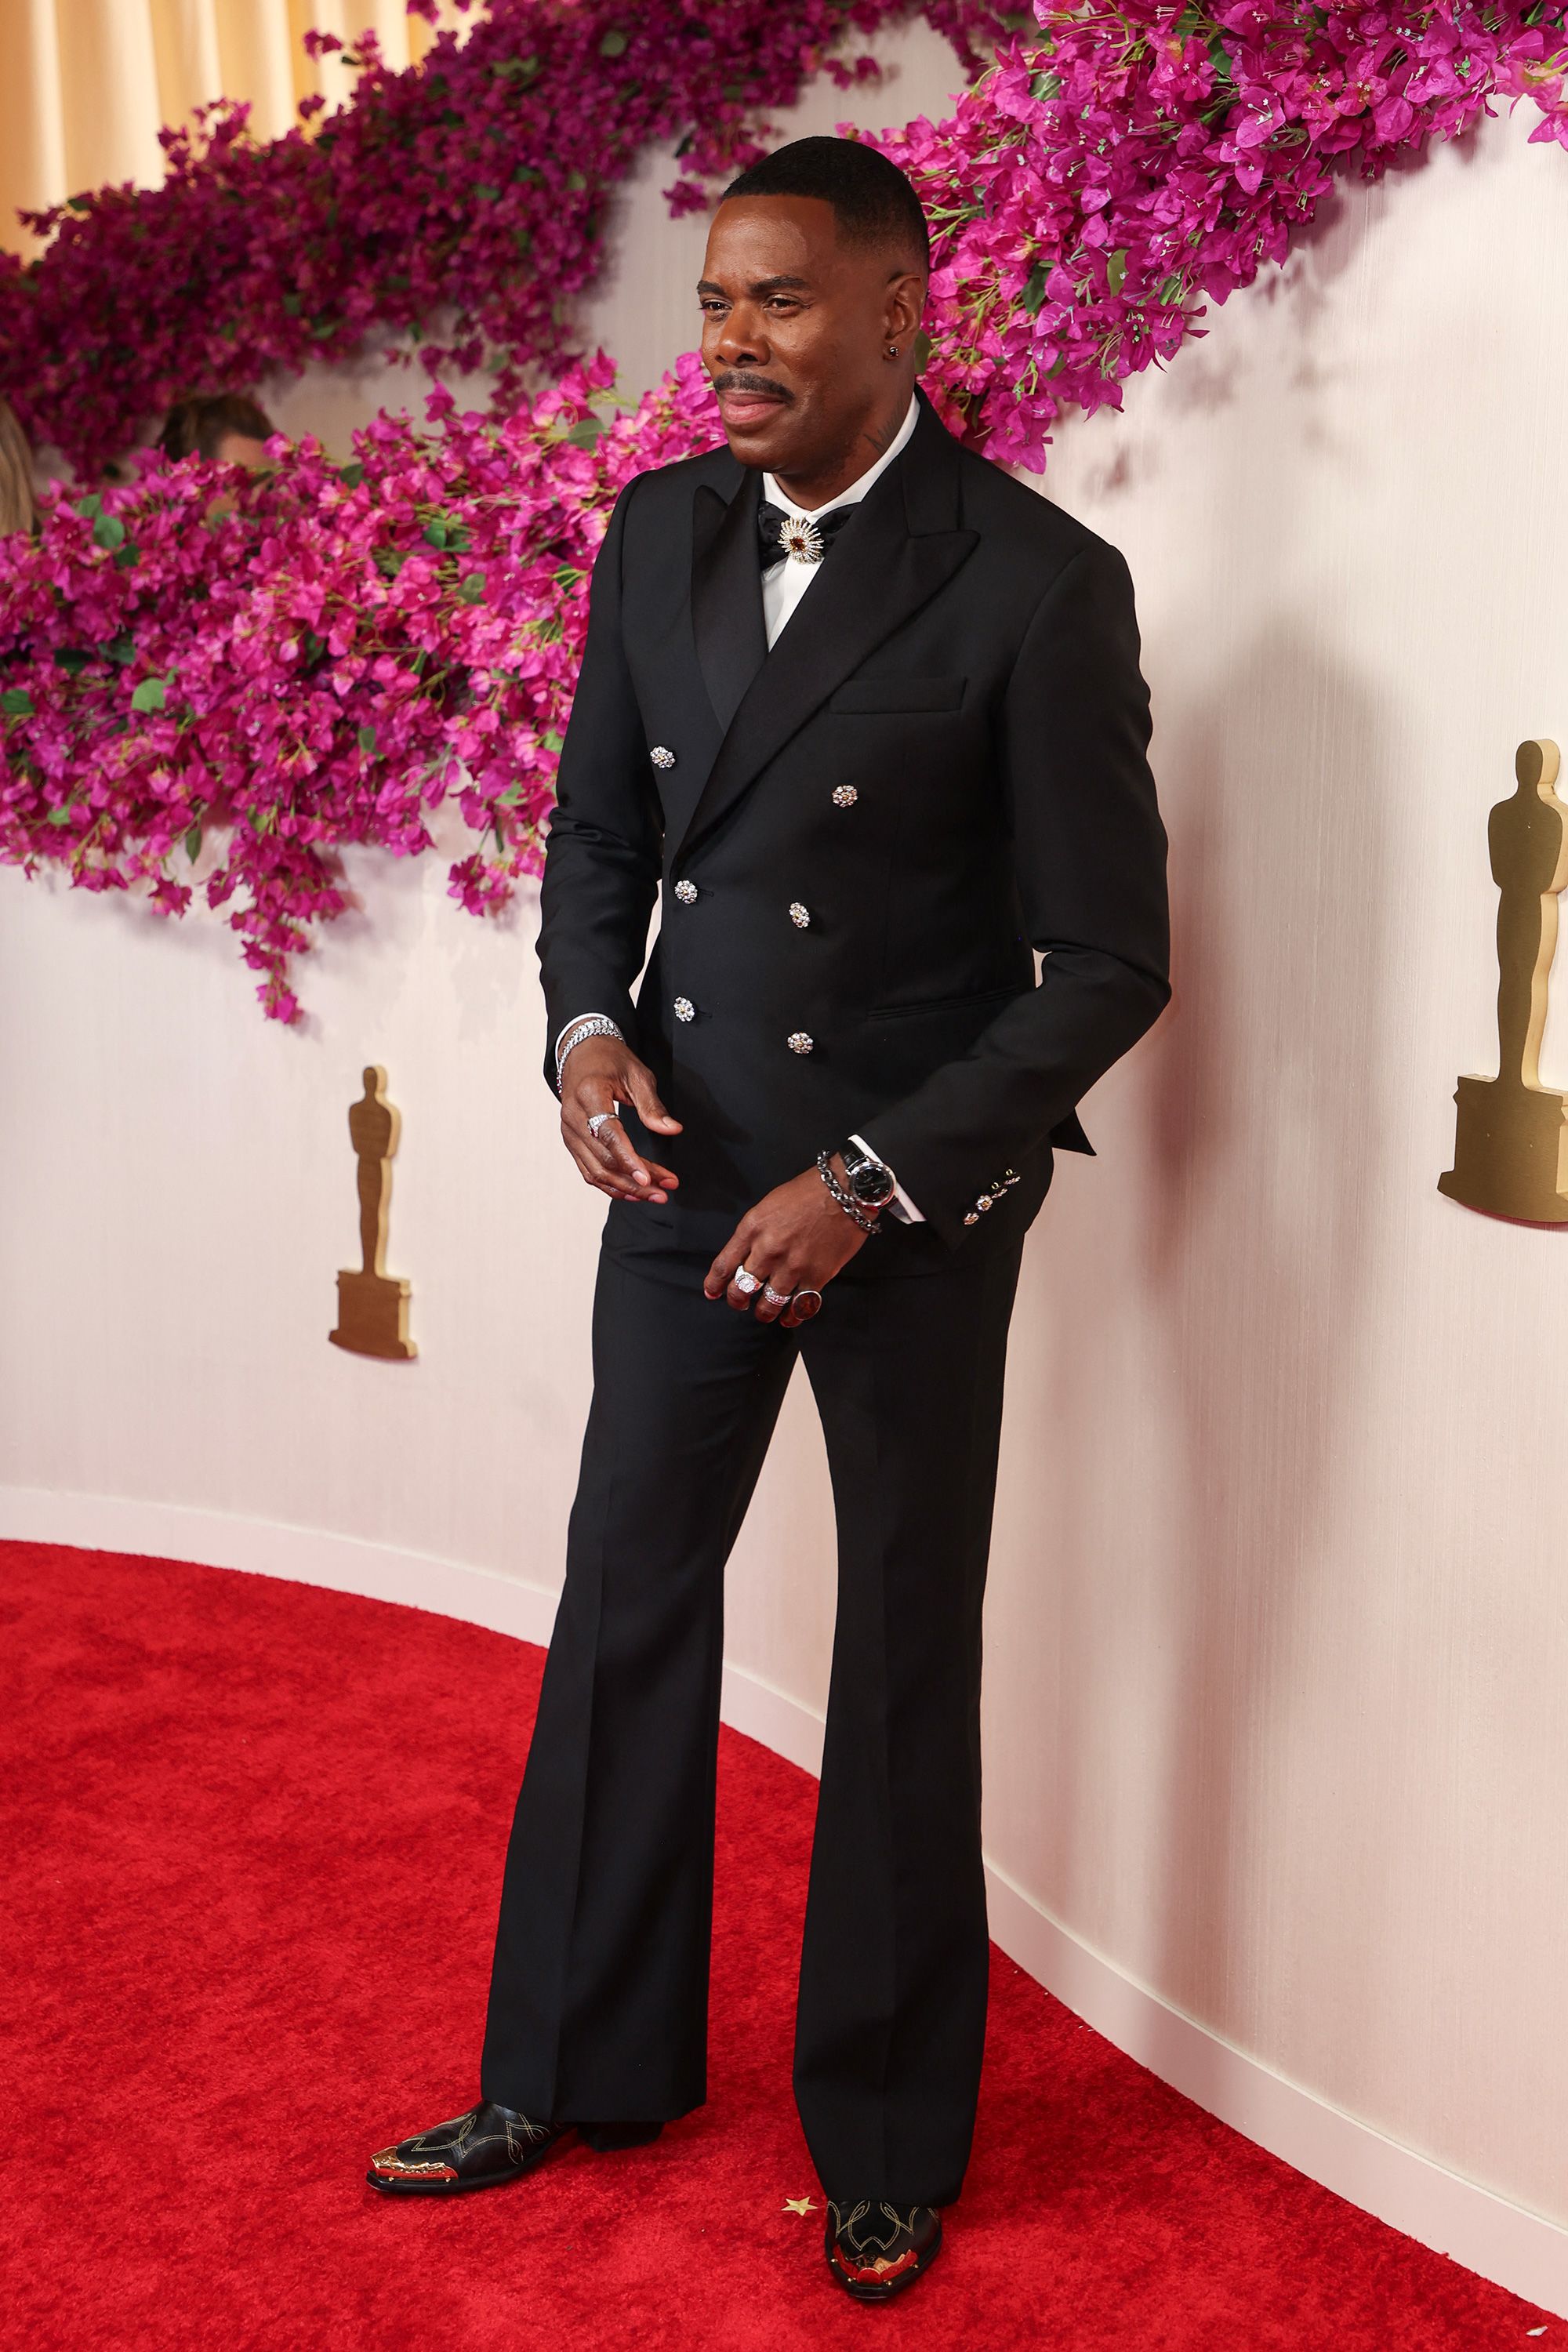 Best Actor nominee Colman Domingo also wore Louis Vuitton, a black double breasted suit with statement bowtie and jewelry by David Yurman. "I wanted to just shine like a diamond," he told Laverne Cox during E’s red carpet coverage. 